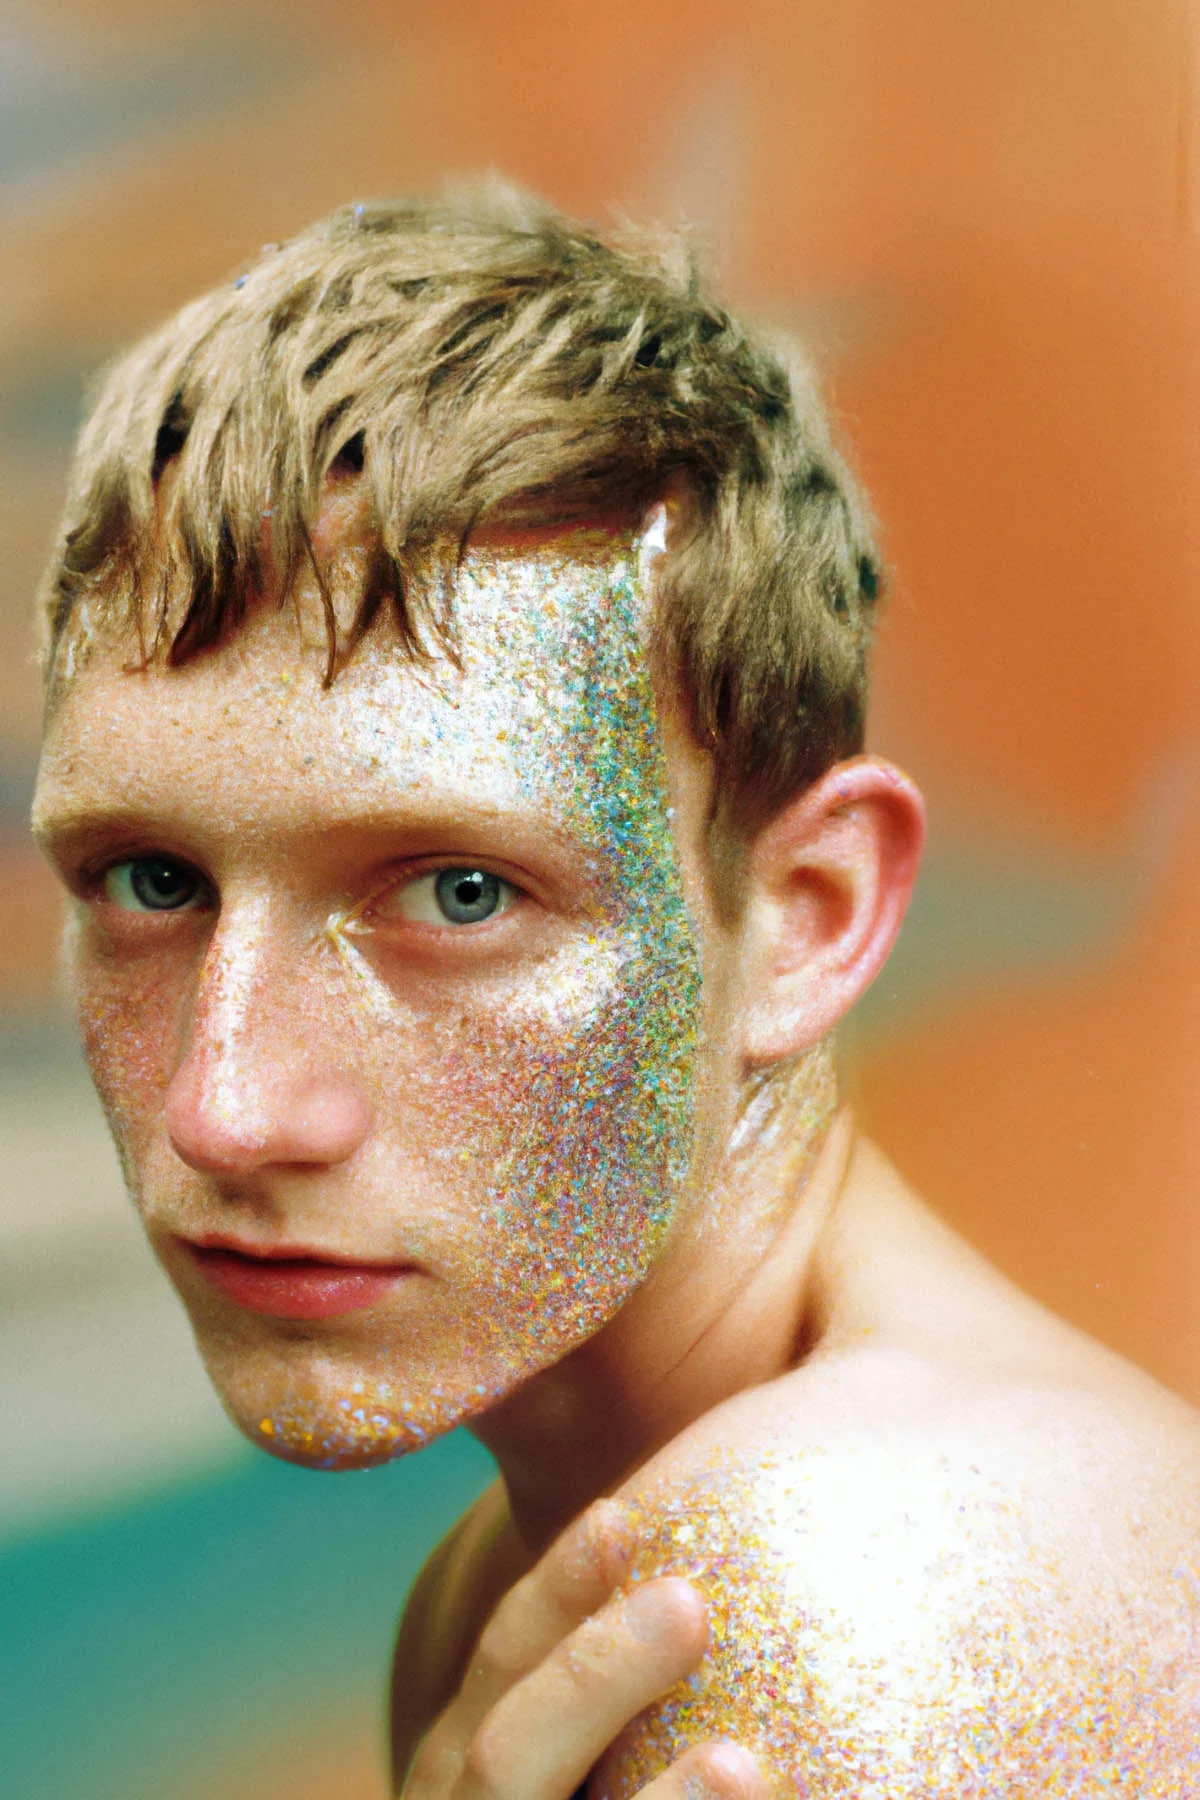 An AI-generated photograph of a person staring into the camera, with their face and shoulder covered in colorful glitter